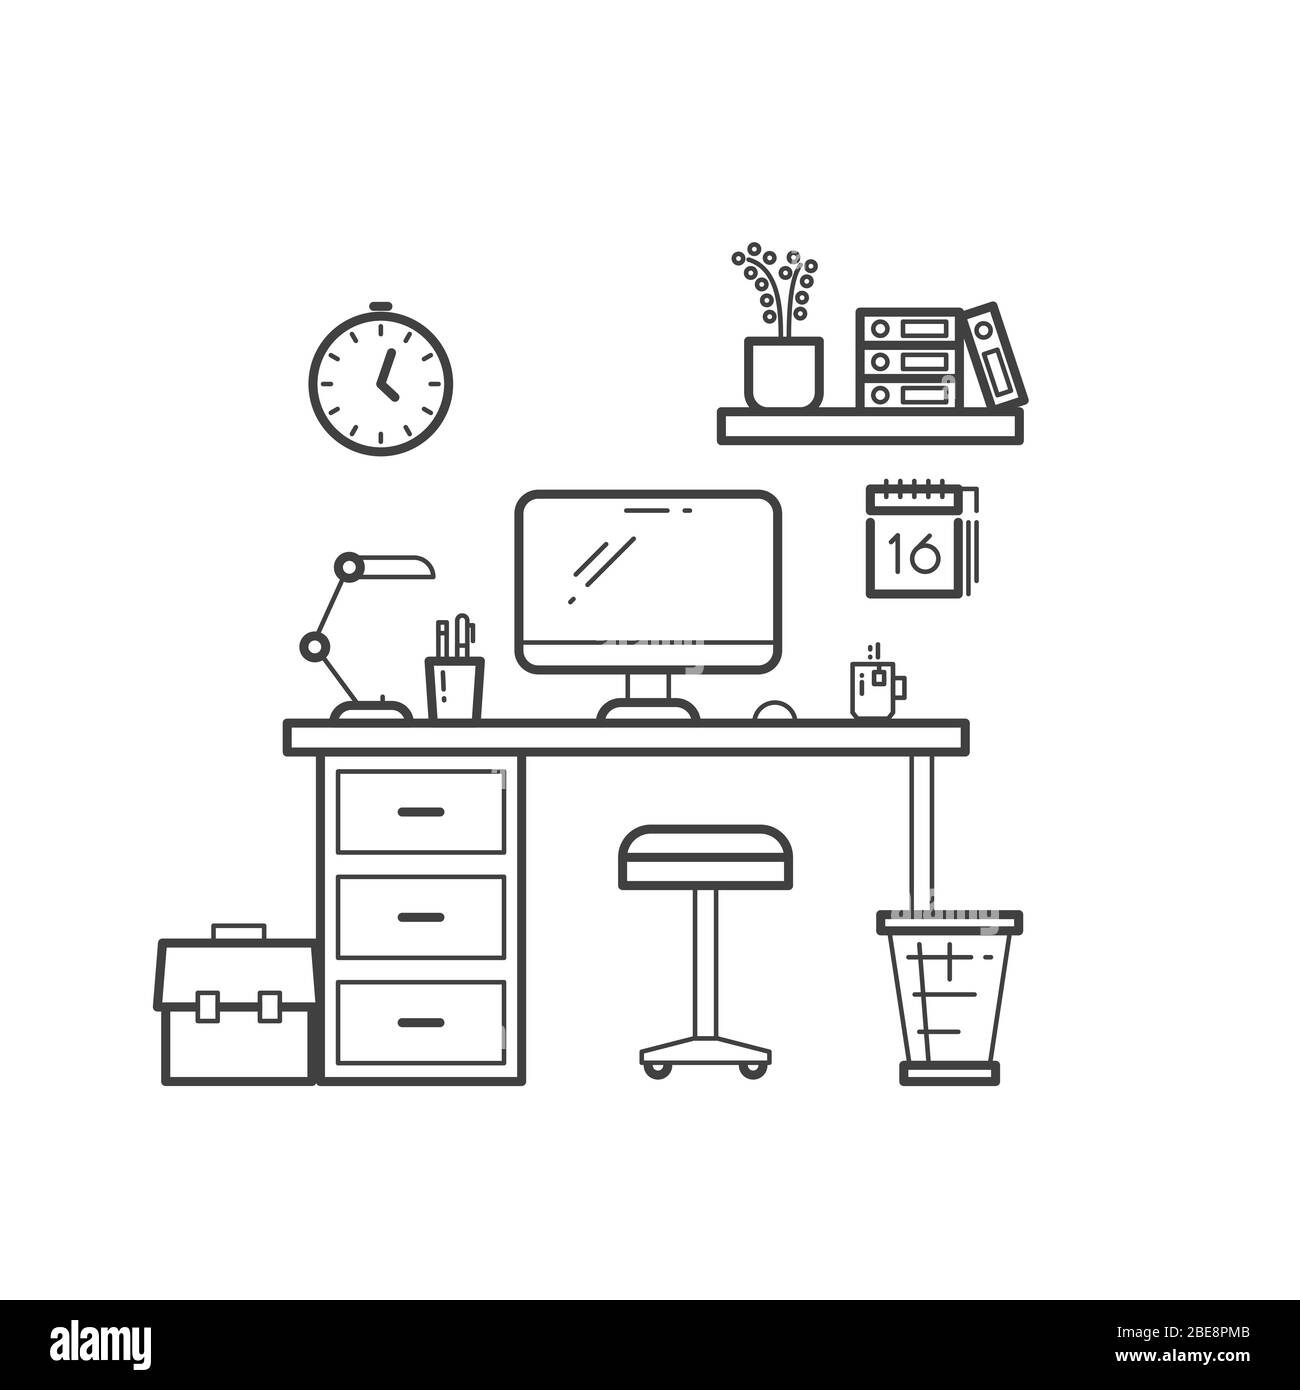 Workspace line concept - outline workplace with computer on white background. Vector illustration Stock Vector